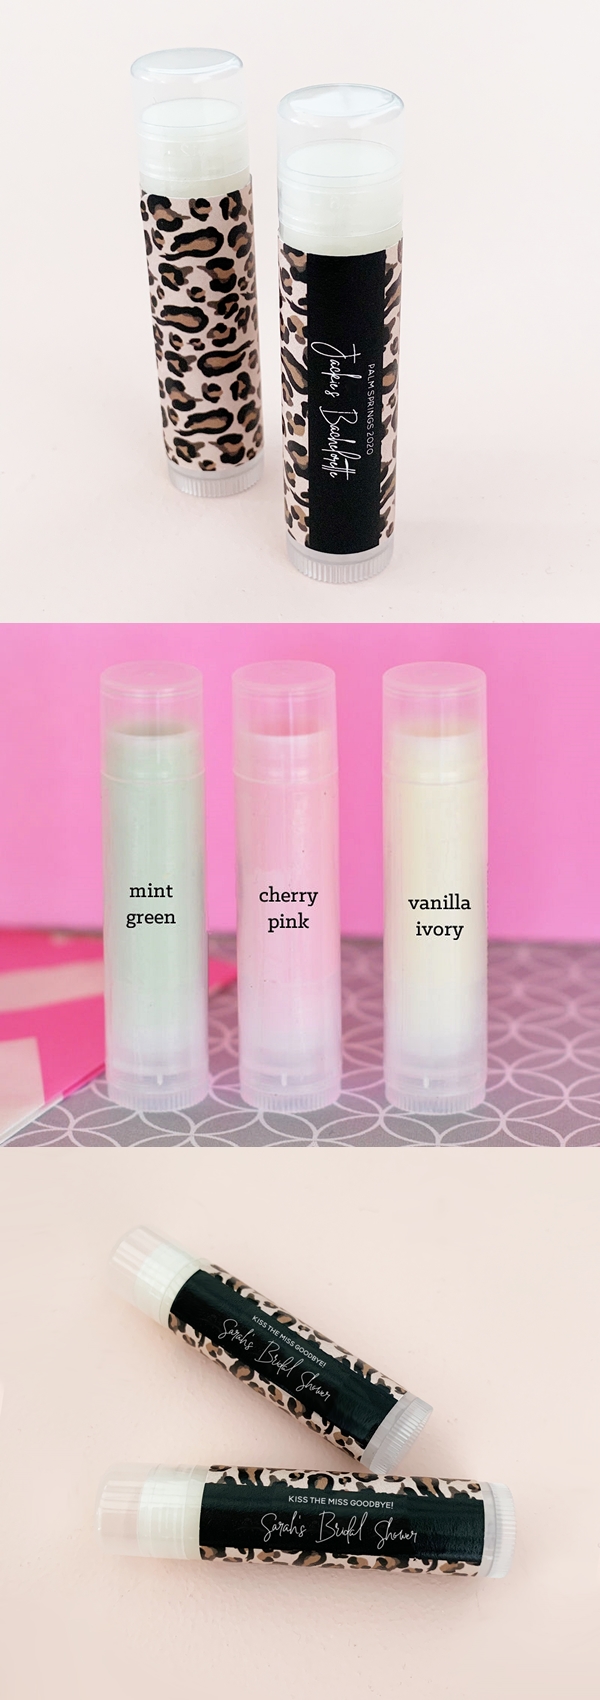 Event Blossom Personalized Leopard Print Lip Balm Tubes